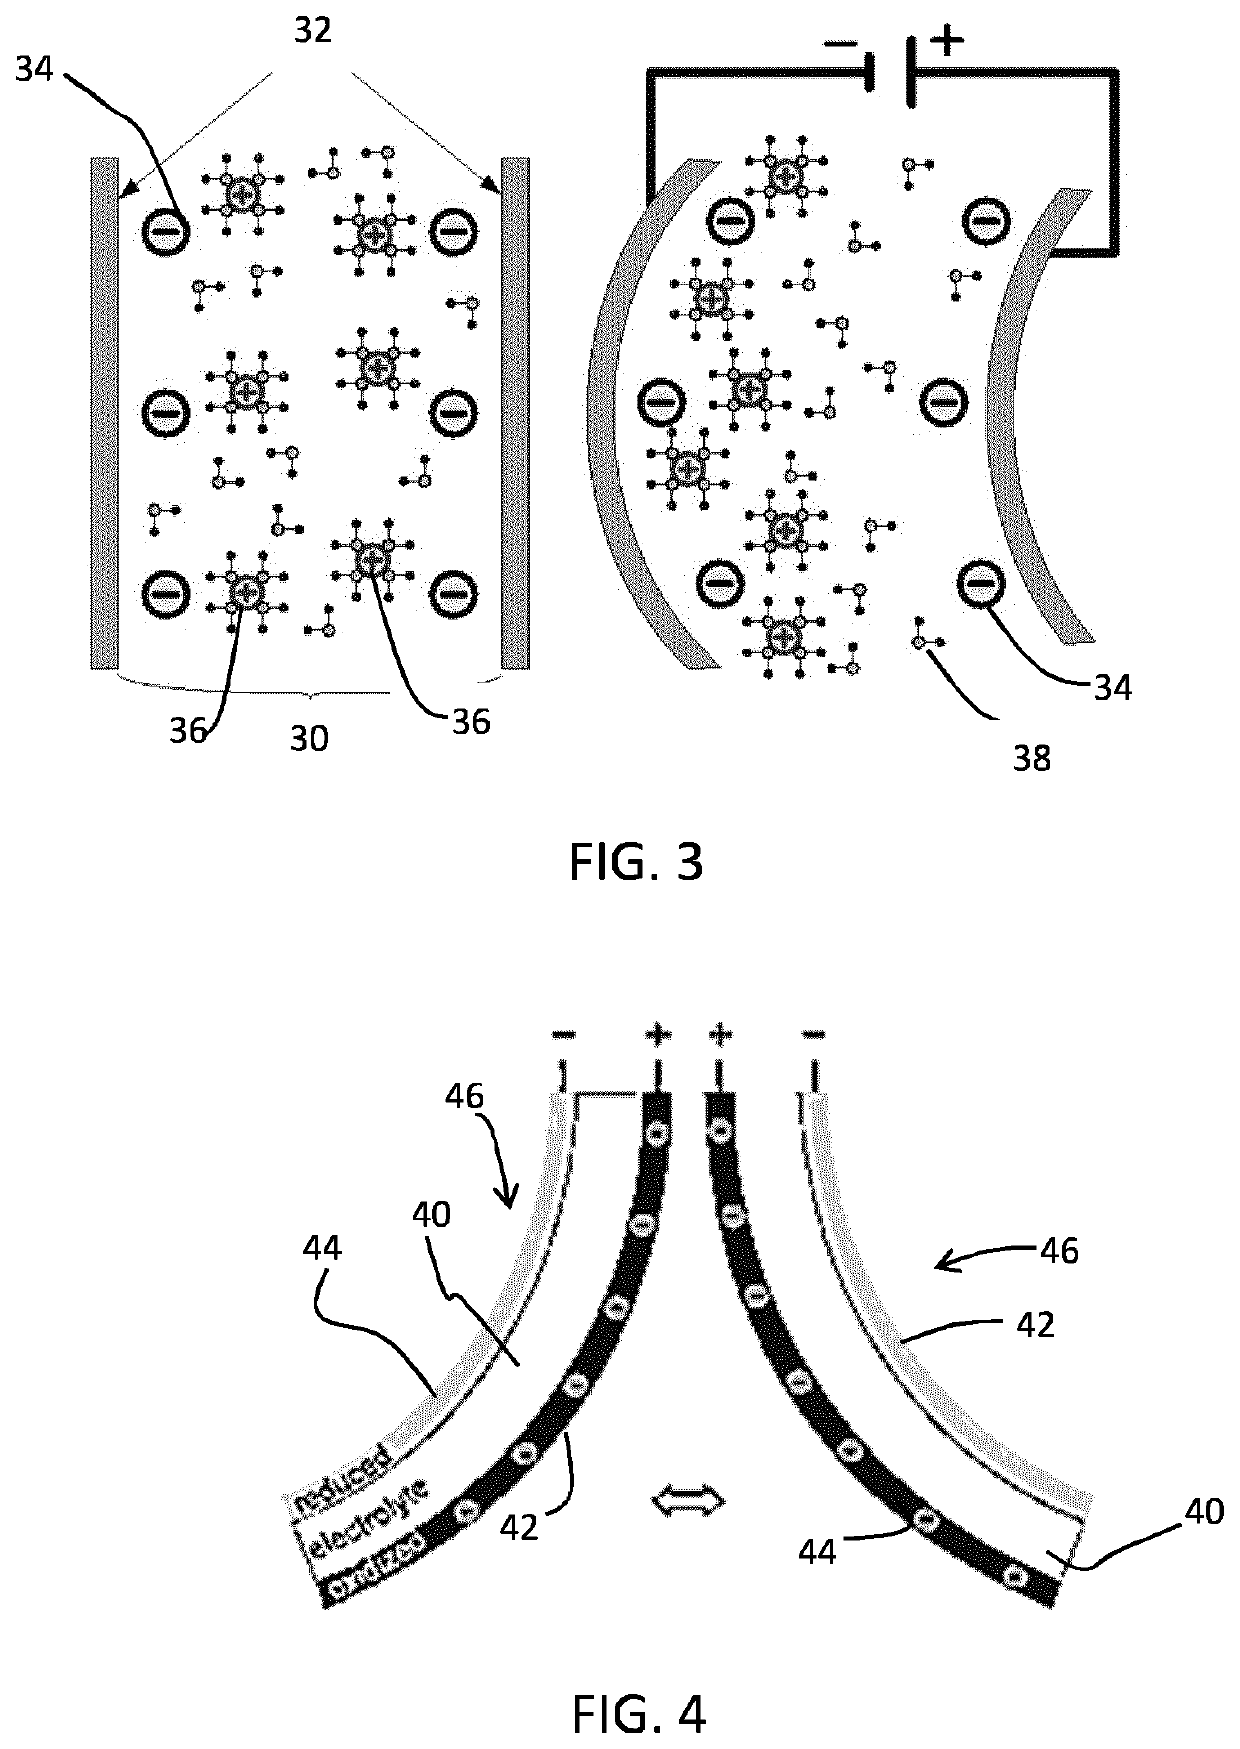 Actuator device based on an electroactive polymer